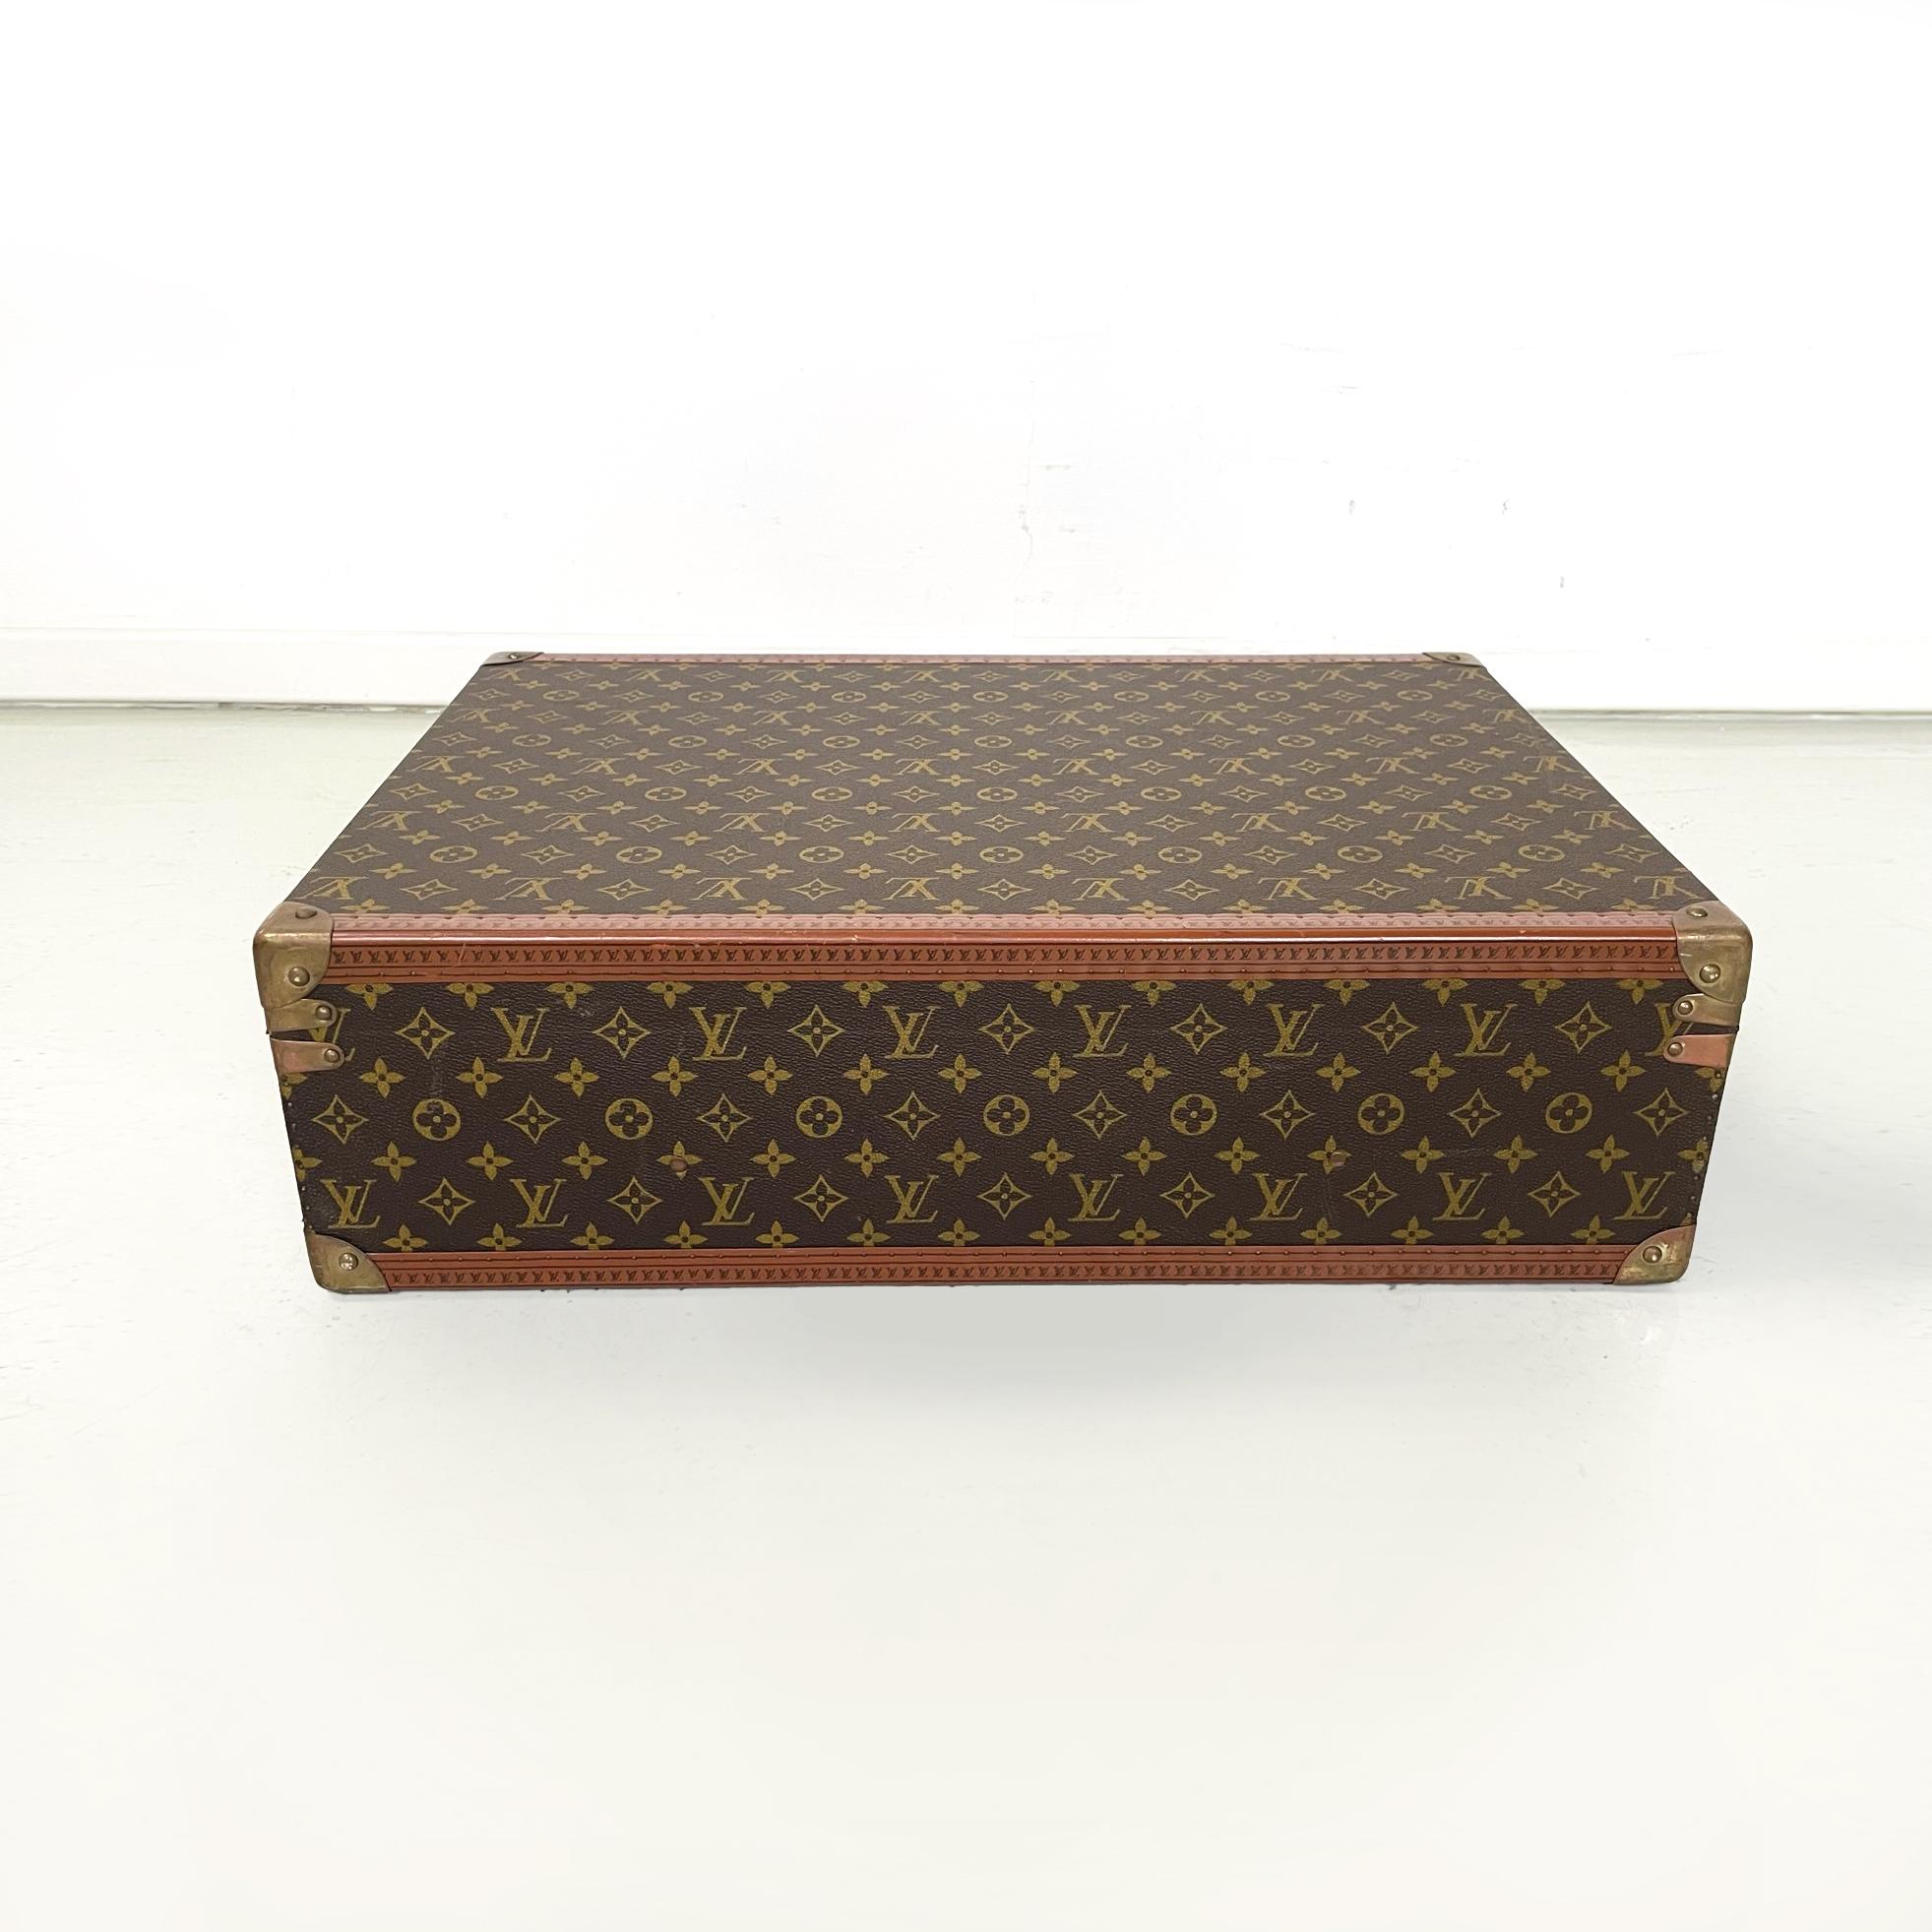 Italian French Mid-Century Modern Luggage Suitcase brown leather by Louis Vuitton 1960s